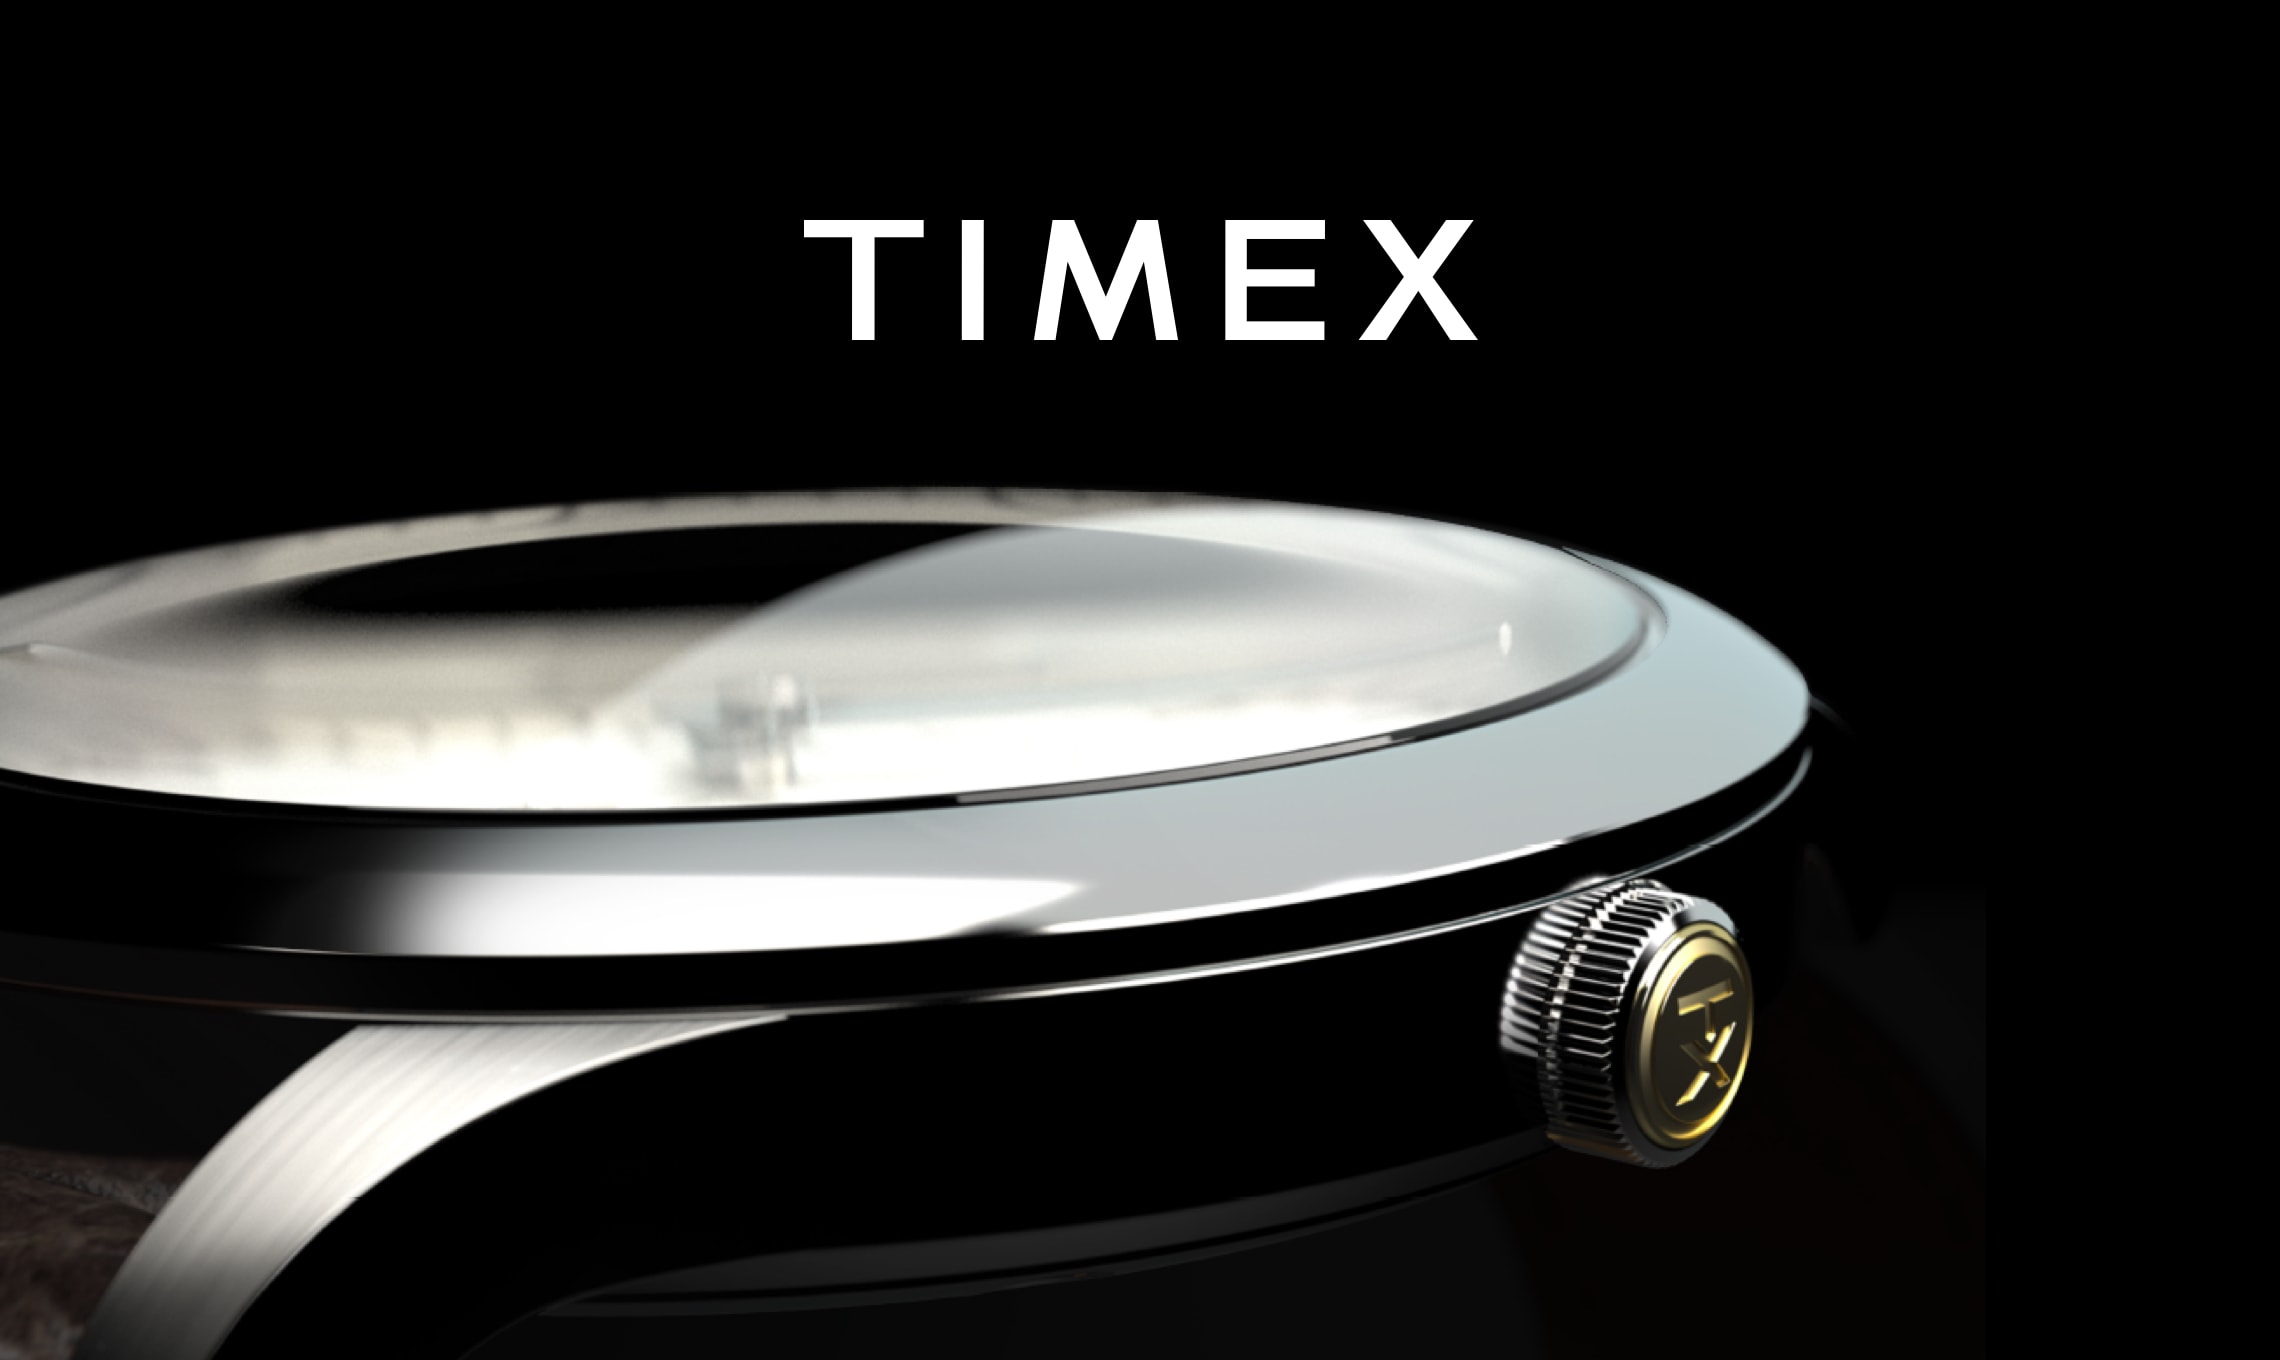 A watch with the words Timex prominently displaying brand identity.